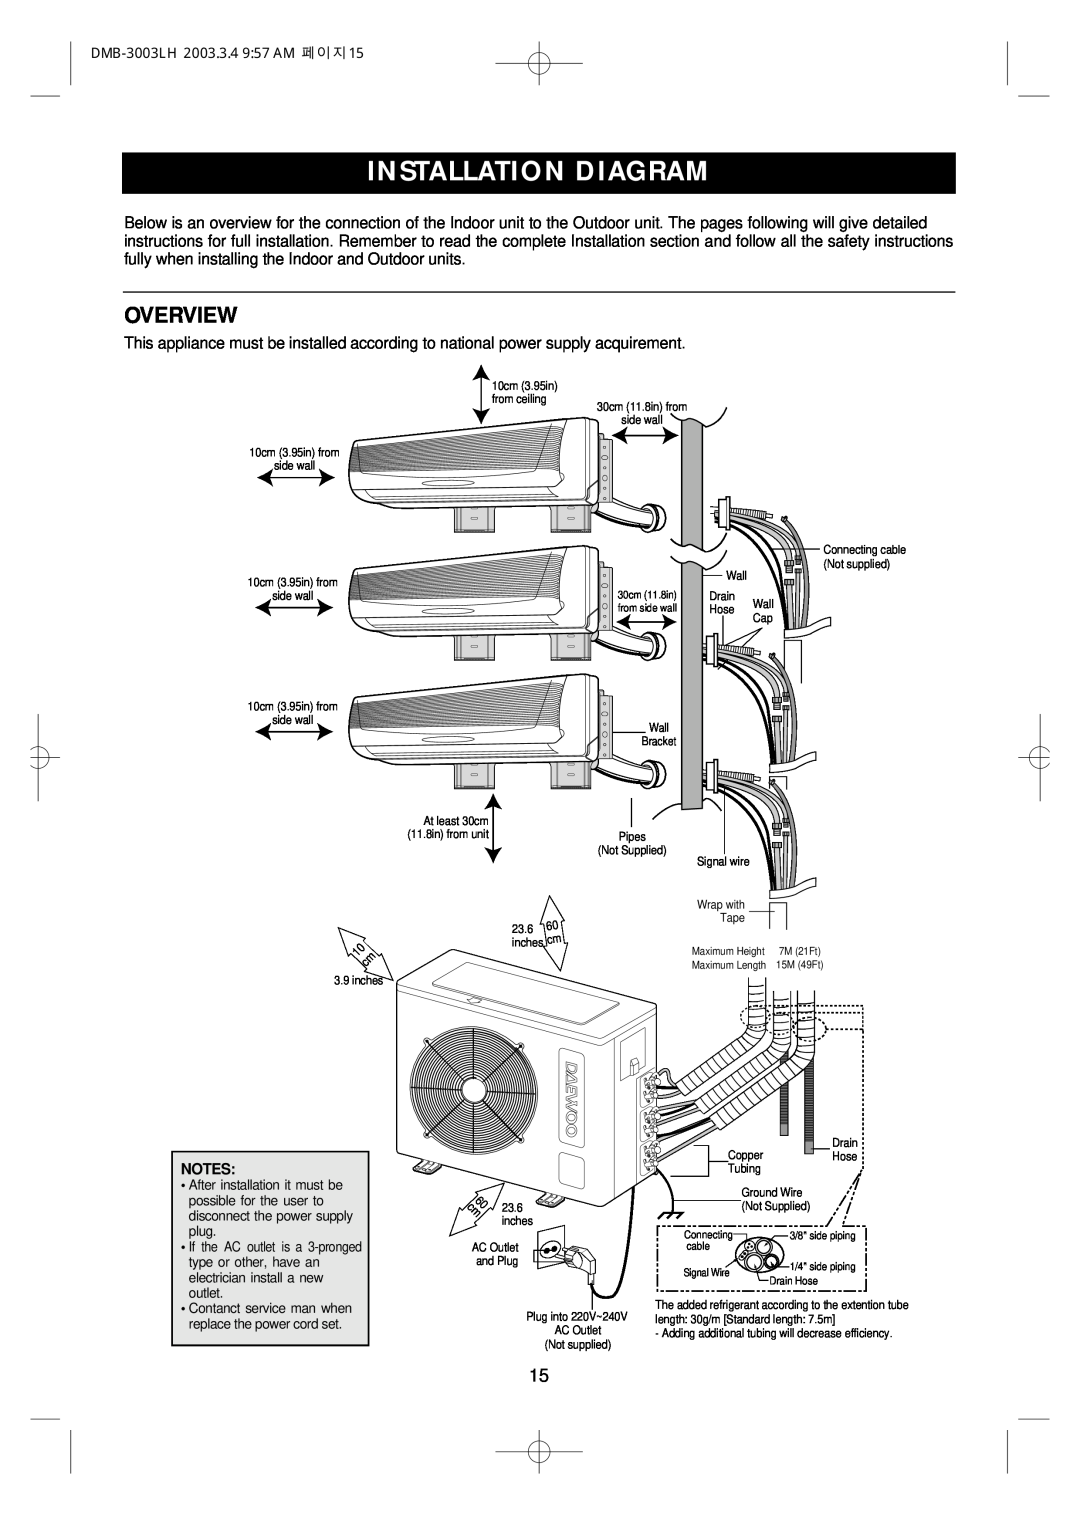 Daewoo DMB-3003LH owner manual Installation Diagram, Overview 